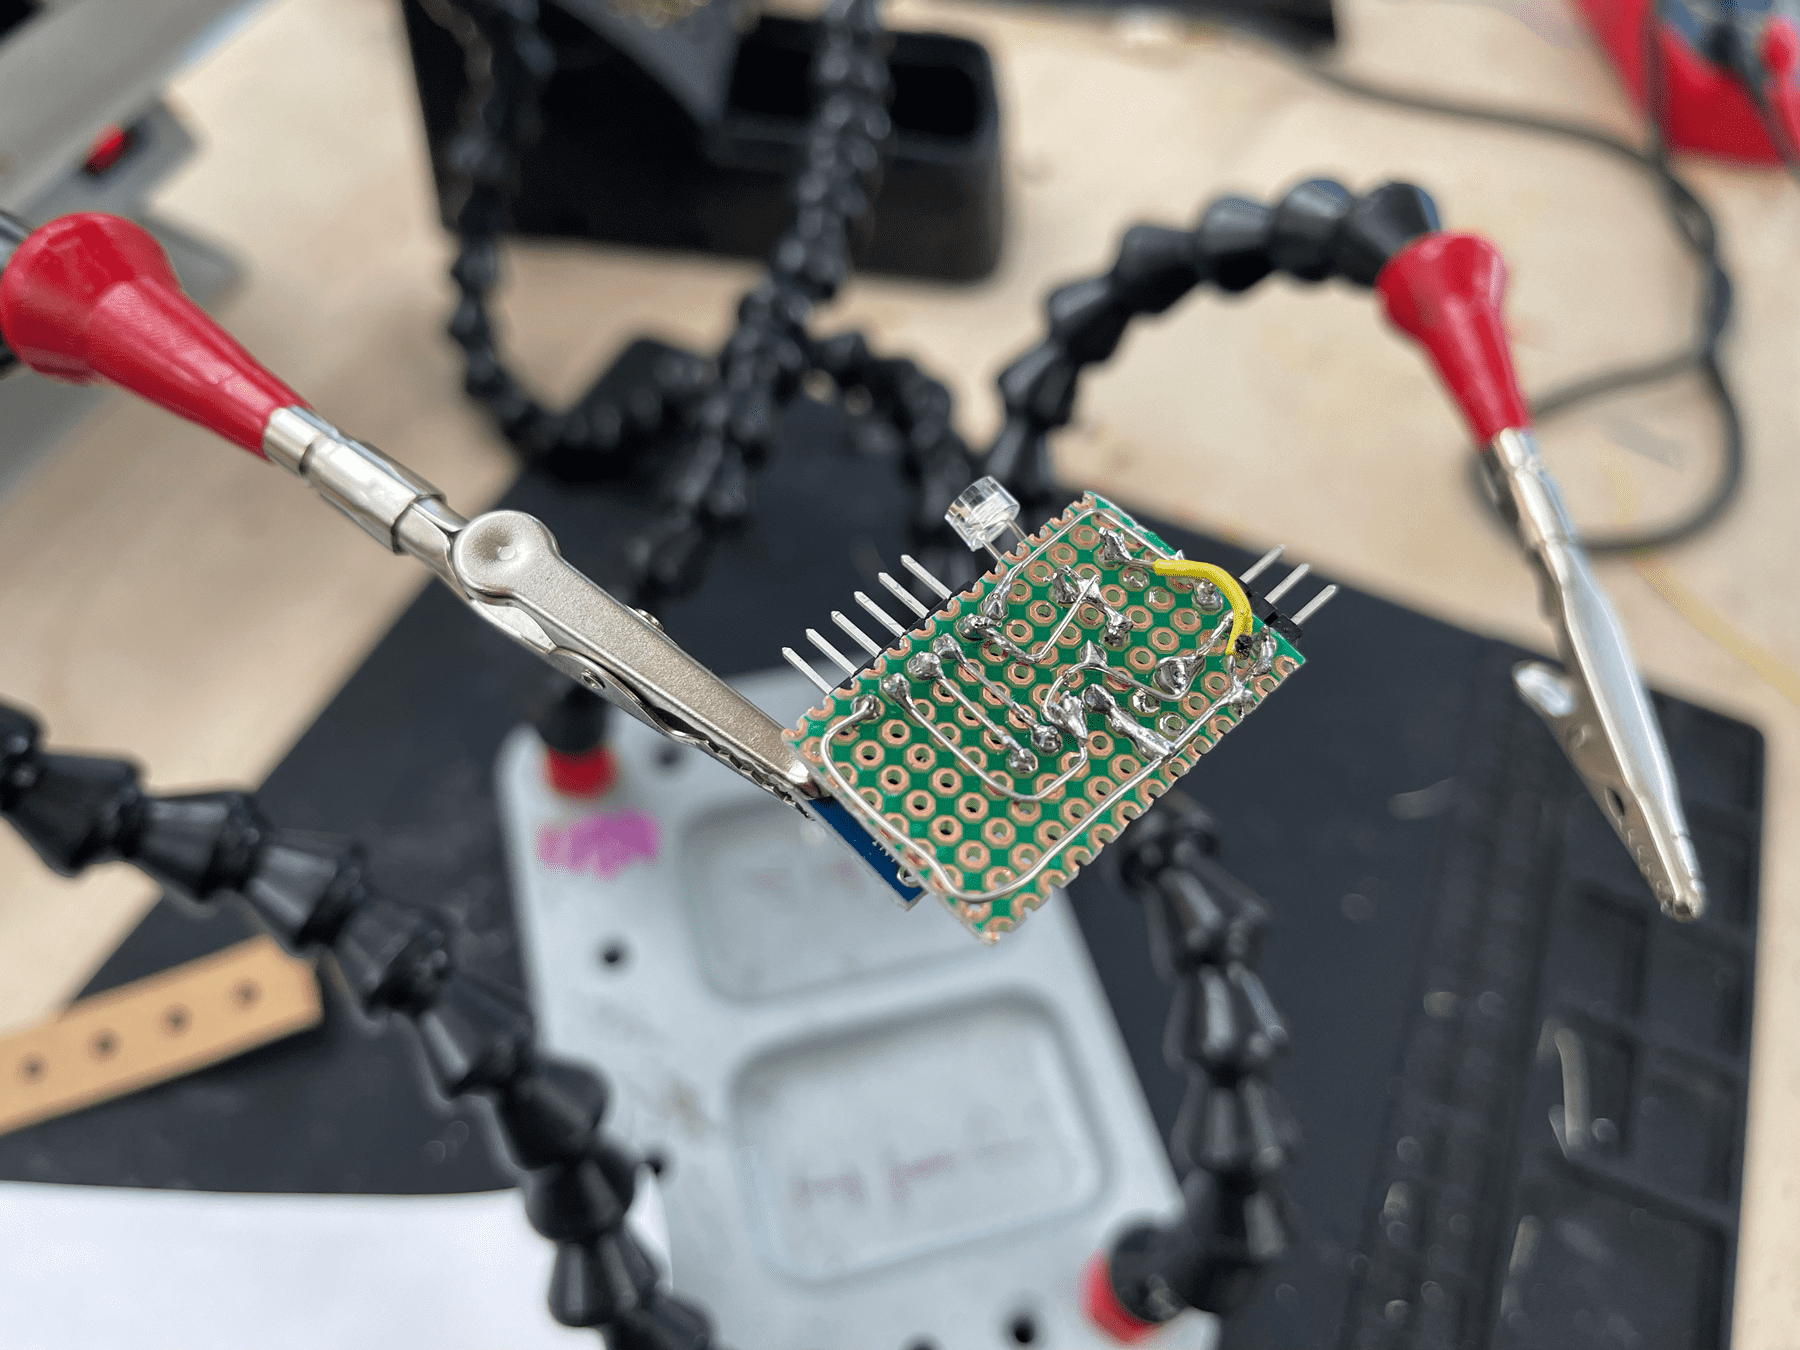 The soldered circuit